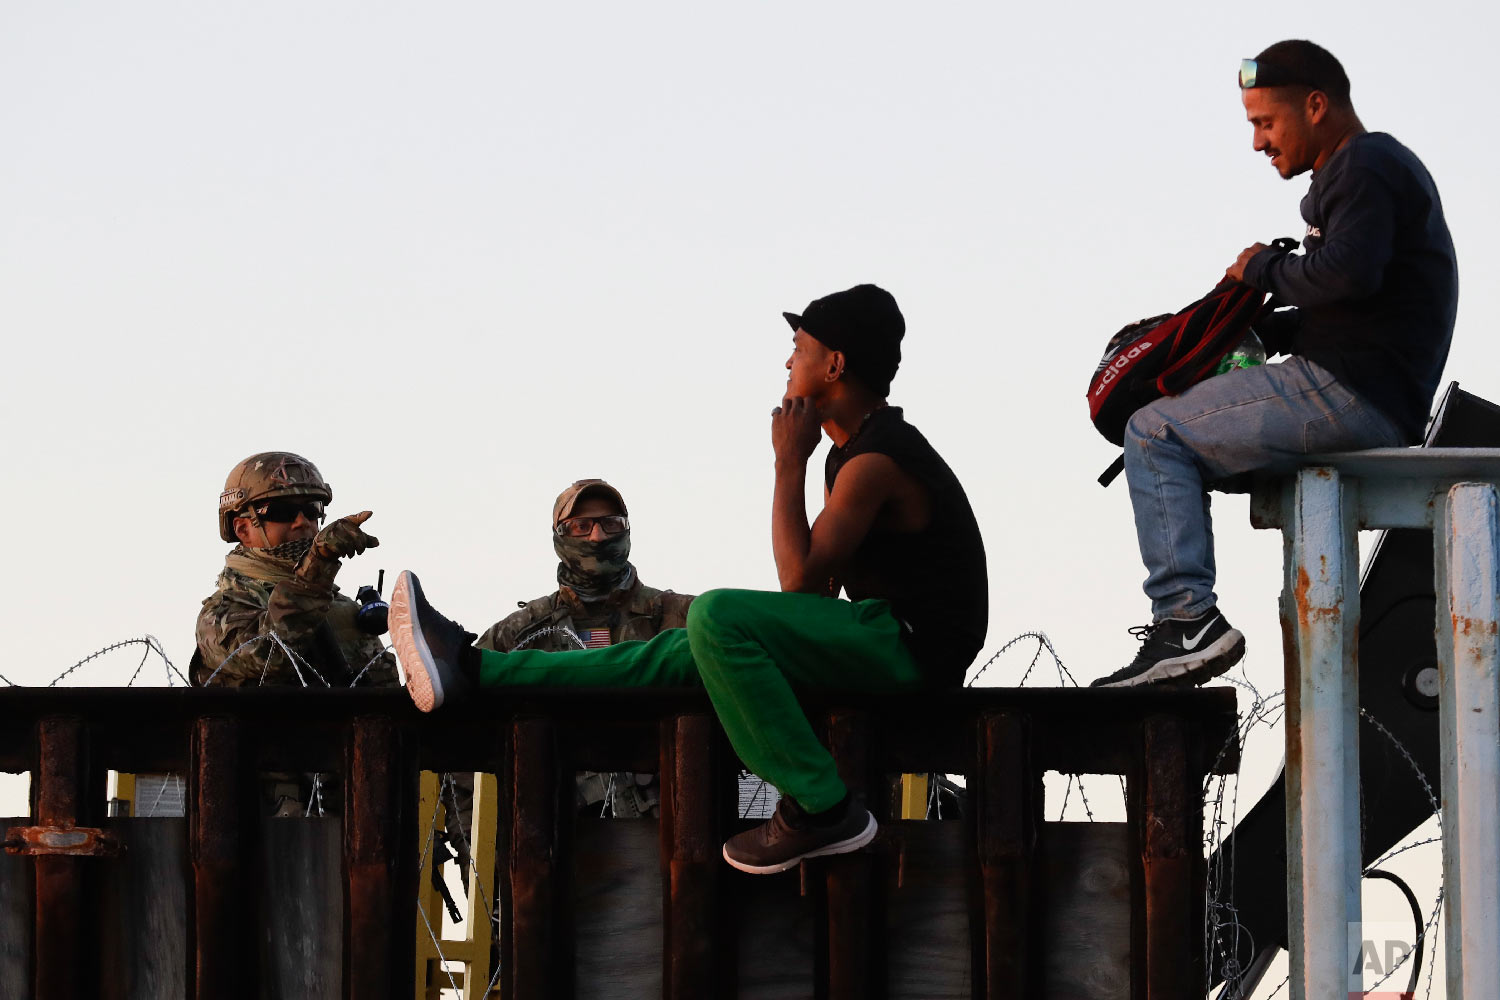  U.S. Border Patrol agents, left, speak with two Central American migrants as they sit atop the border structure separating Mexico and the United States in Tijuana, Mexico, on Nov. 14, 2018. (AP Photo/Gregory Bull) 